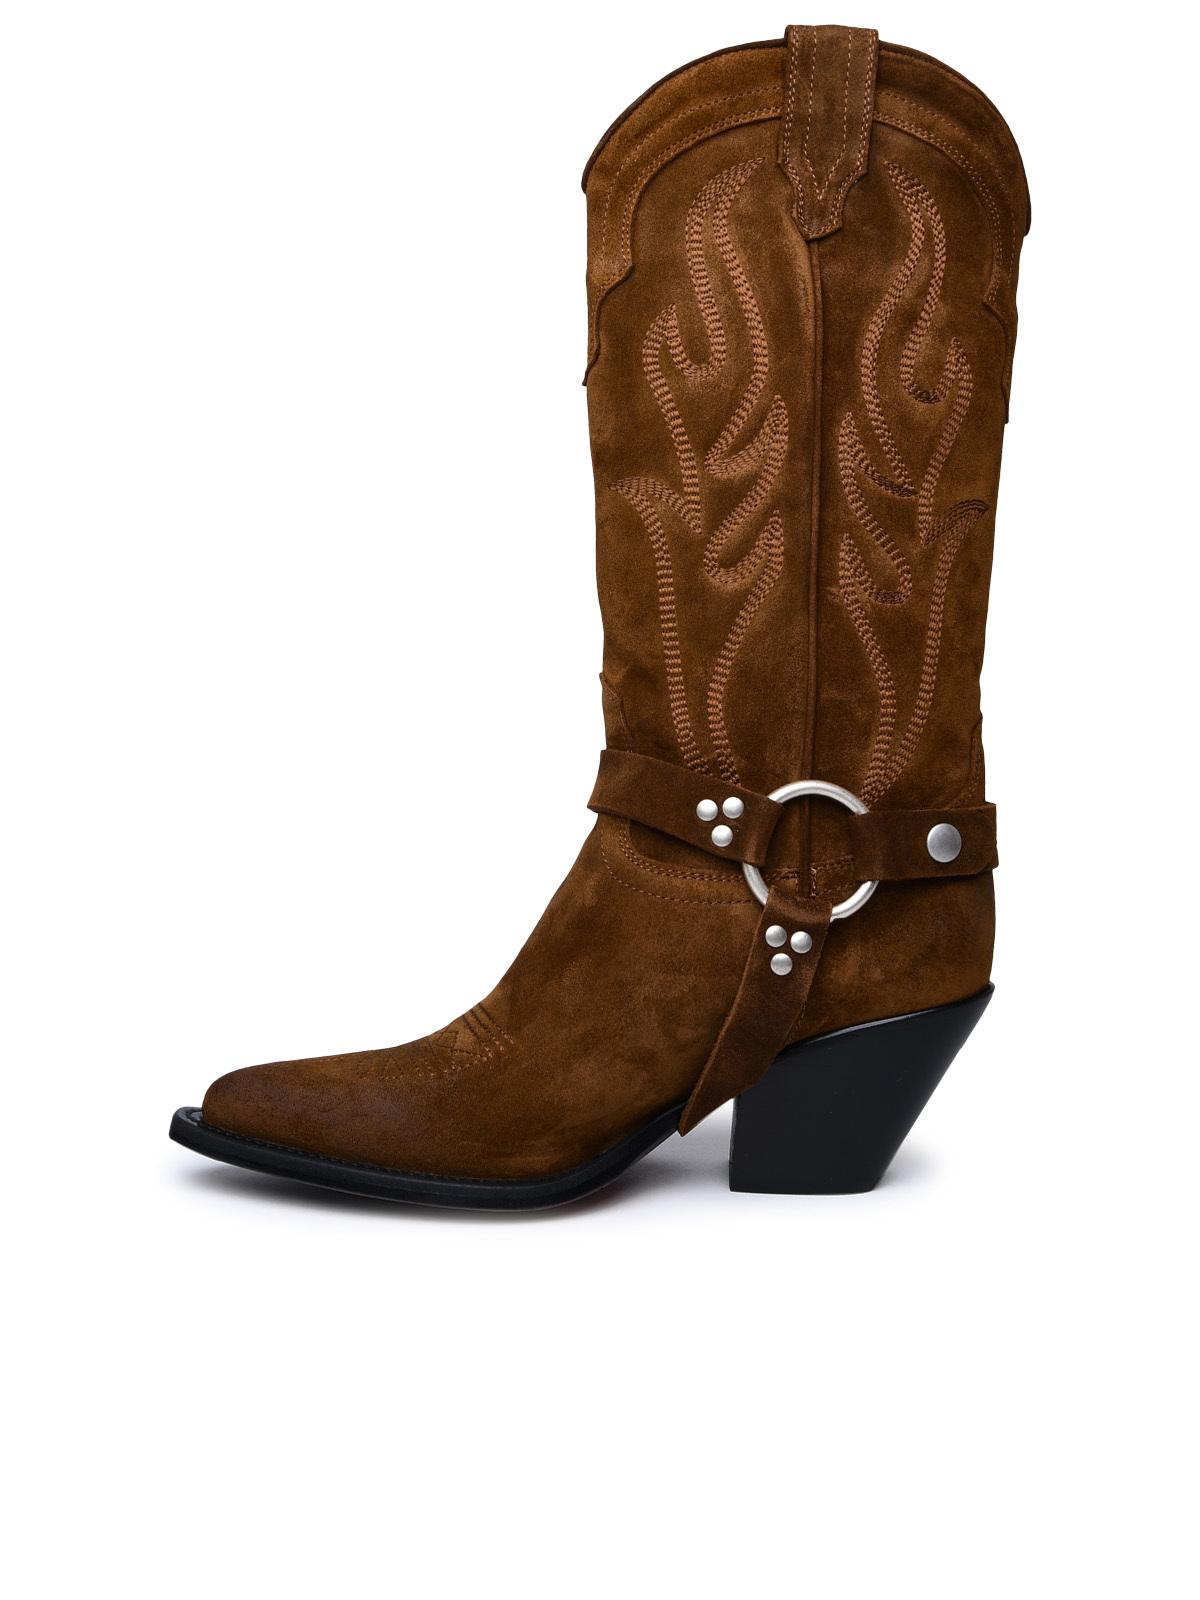 Sonora Brown Suede Boots Woman